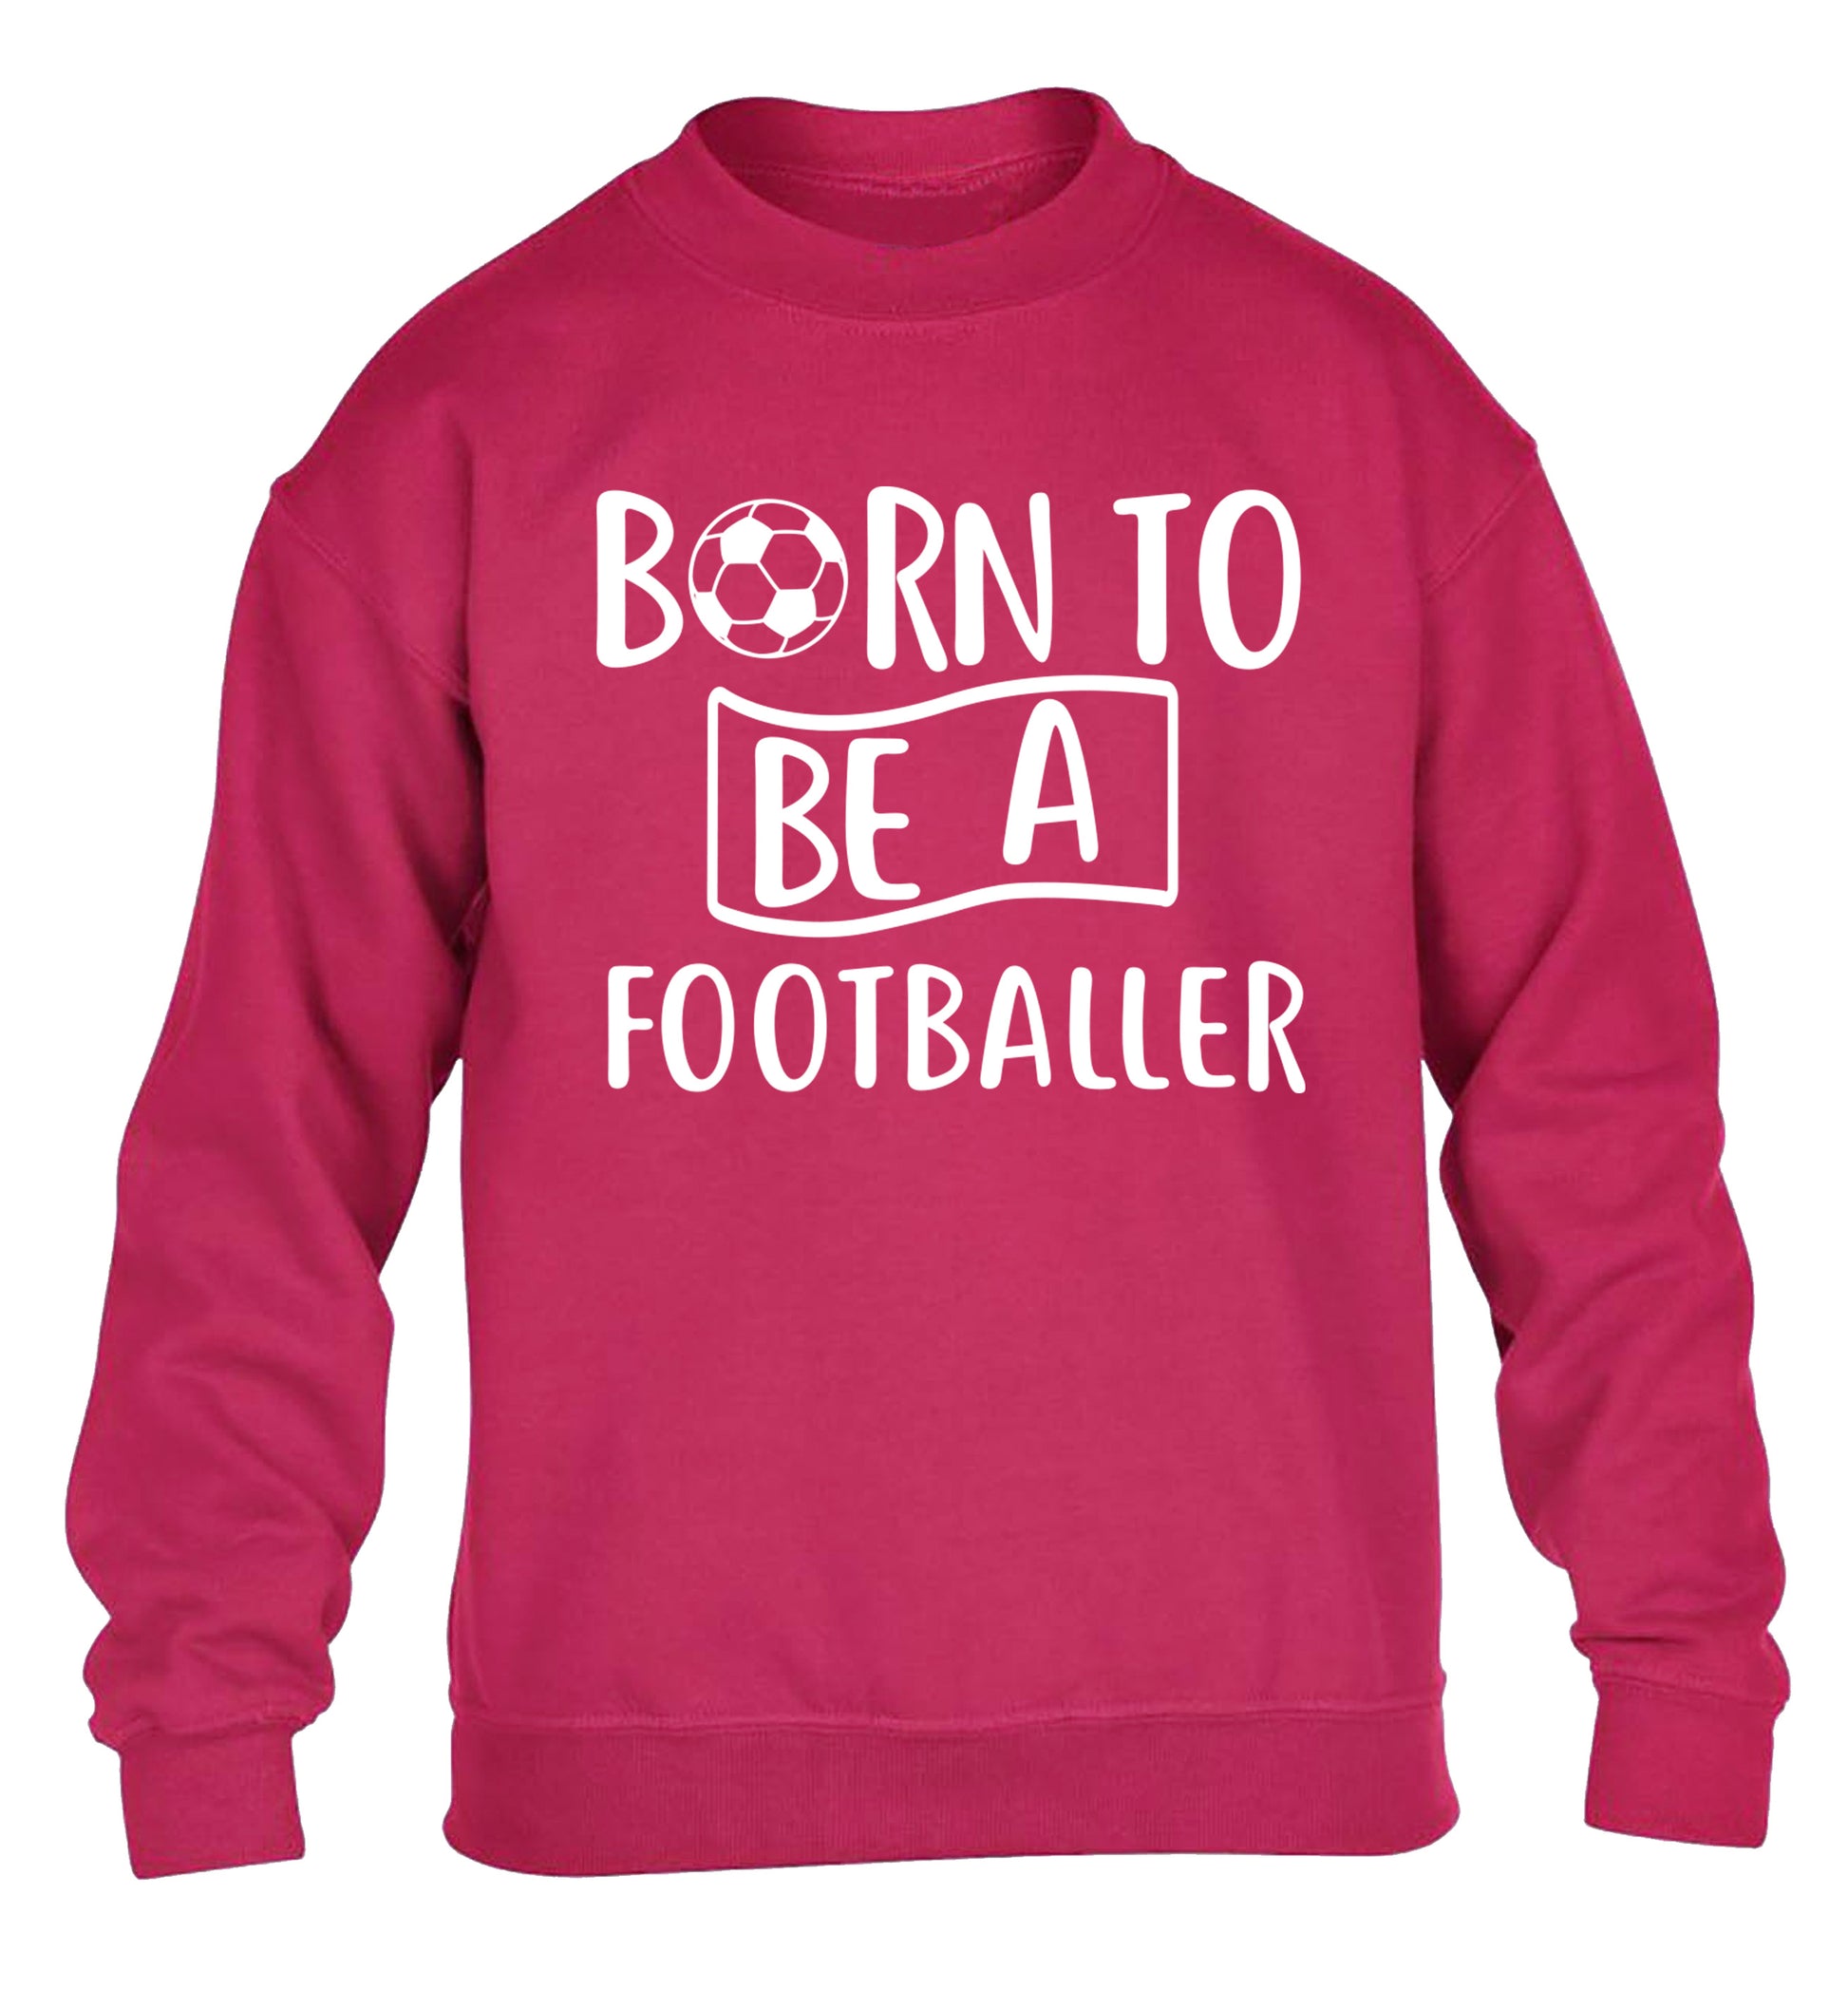 Born to be a footballer children's pink sweater 12-14 Years